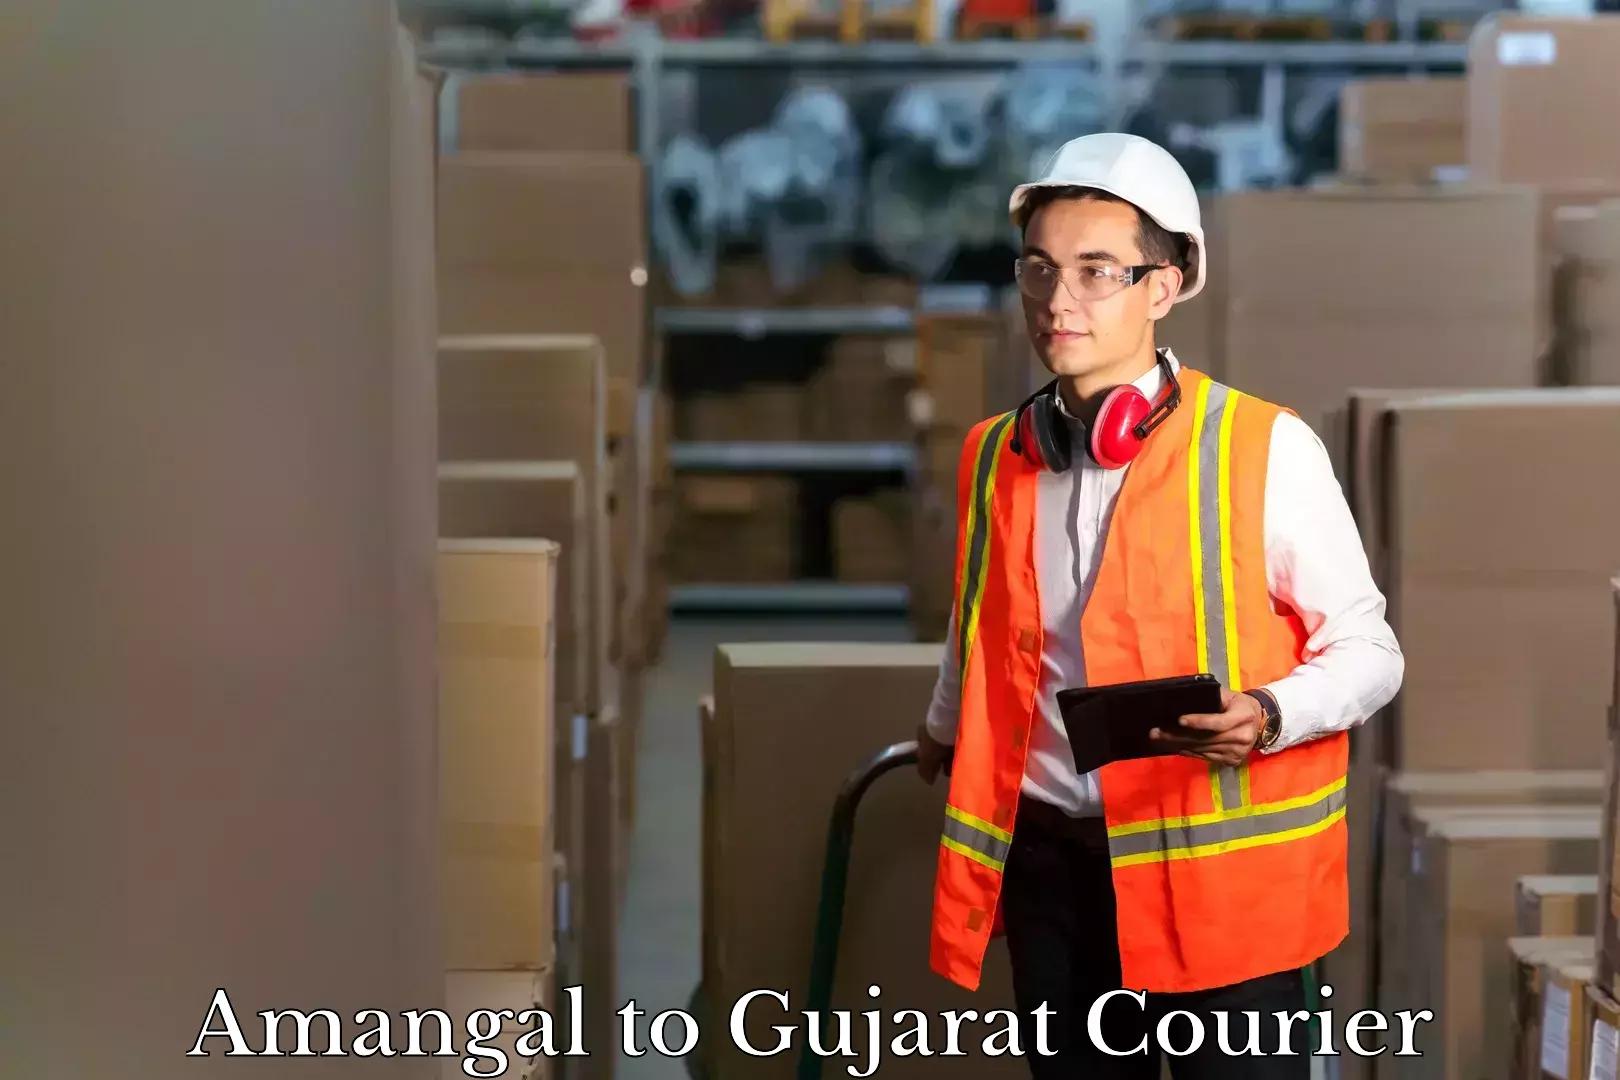 Baggage relocation service Amangal to Gujarat